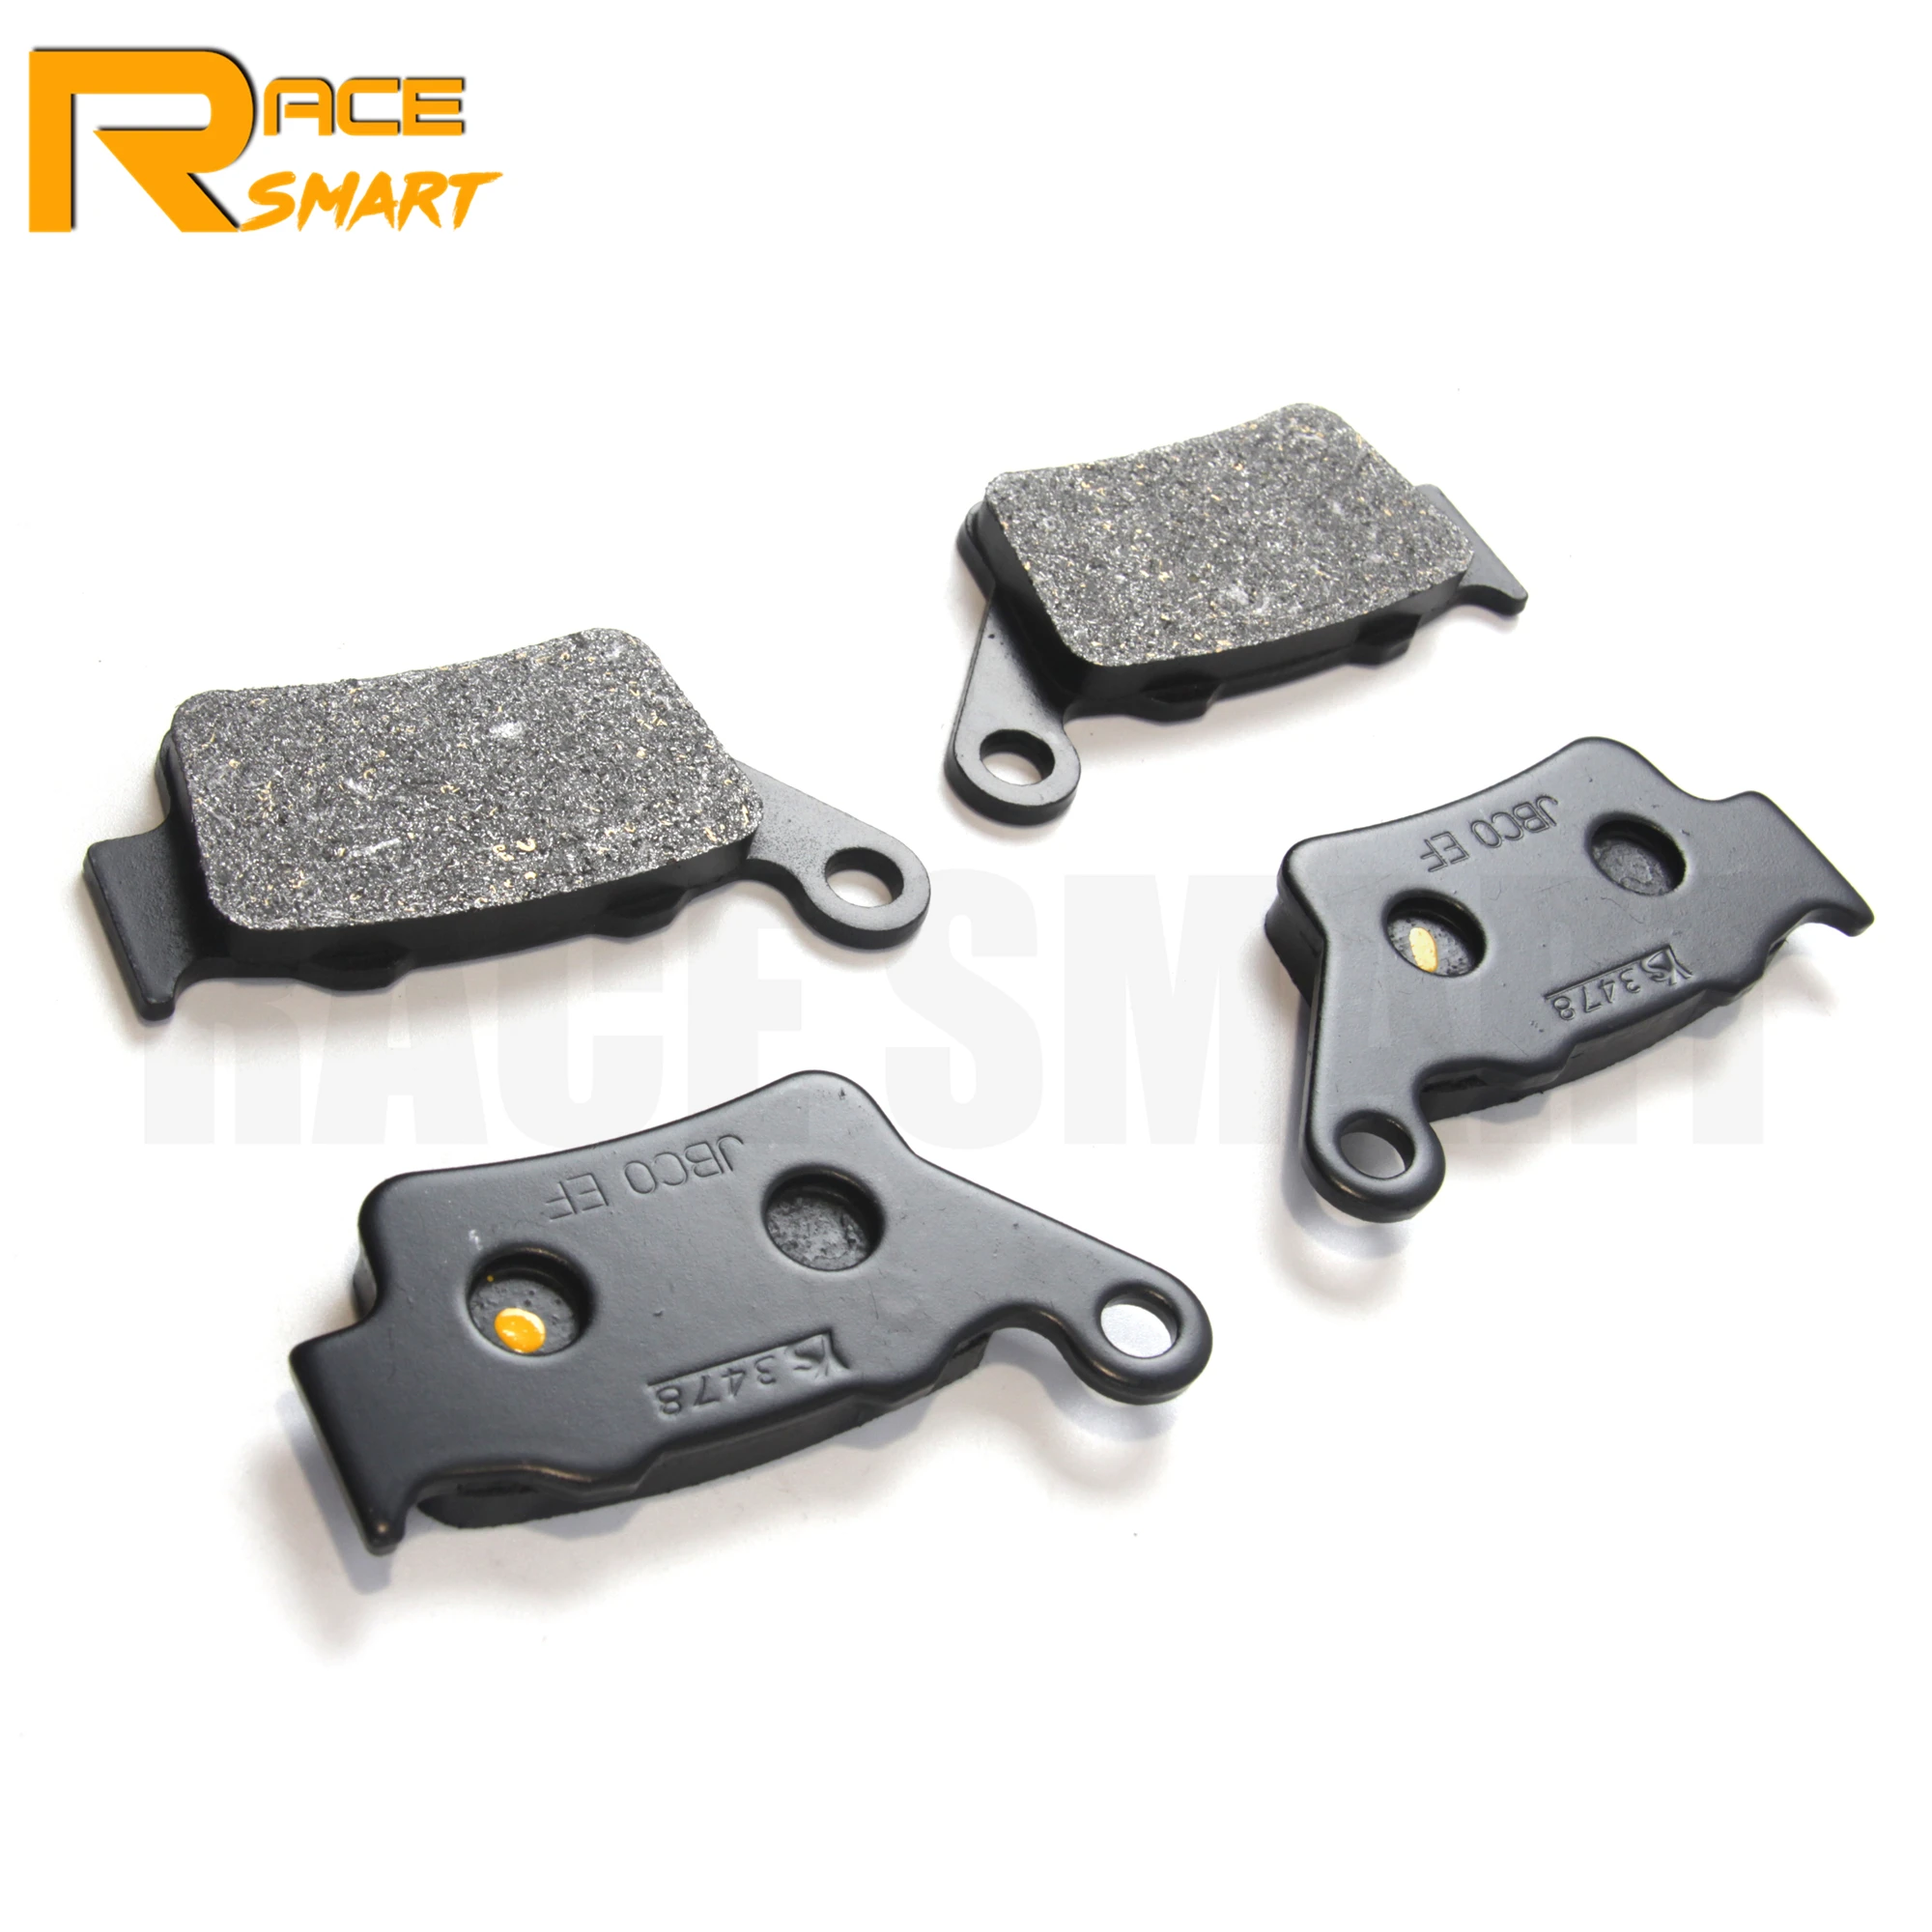 

Motorcycle Rear Brake Pads Pad For CCM 404E 2003-2004 404DS 2003 - 2004 404 DS Supermoto 2007 - 2008 CMX 450 2008 R45 07 - 08